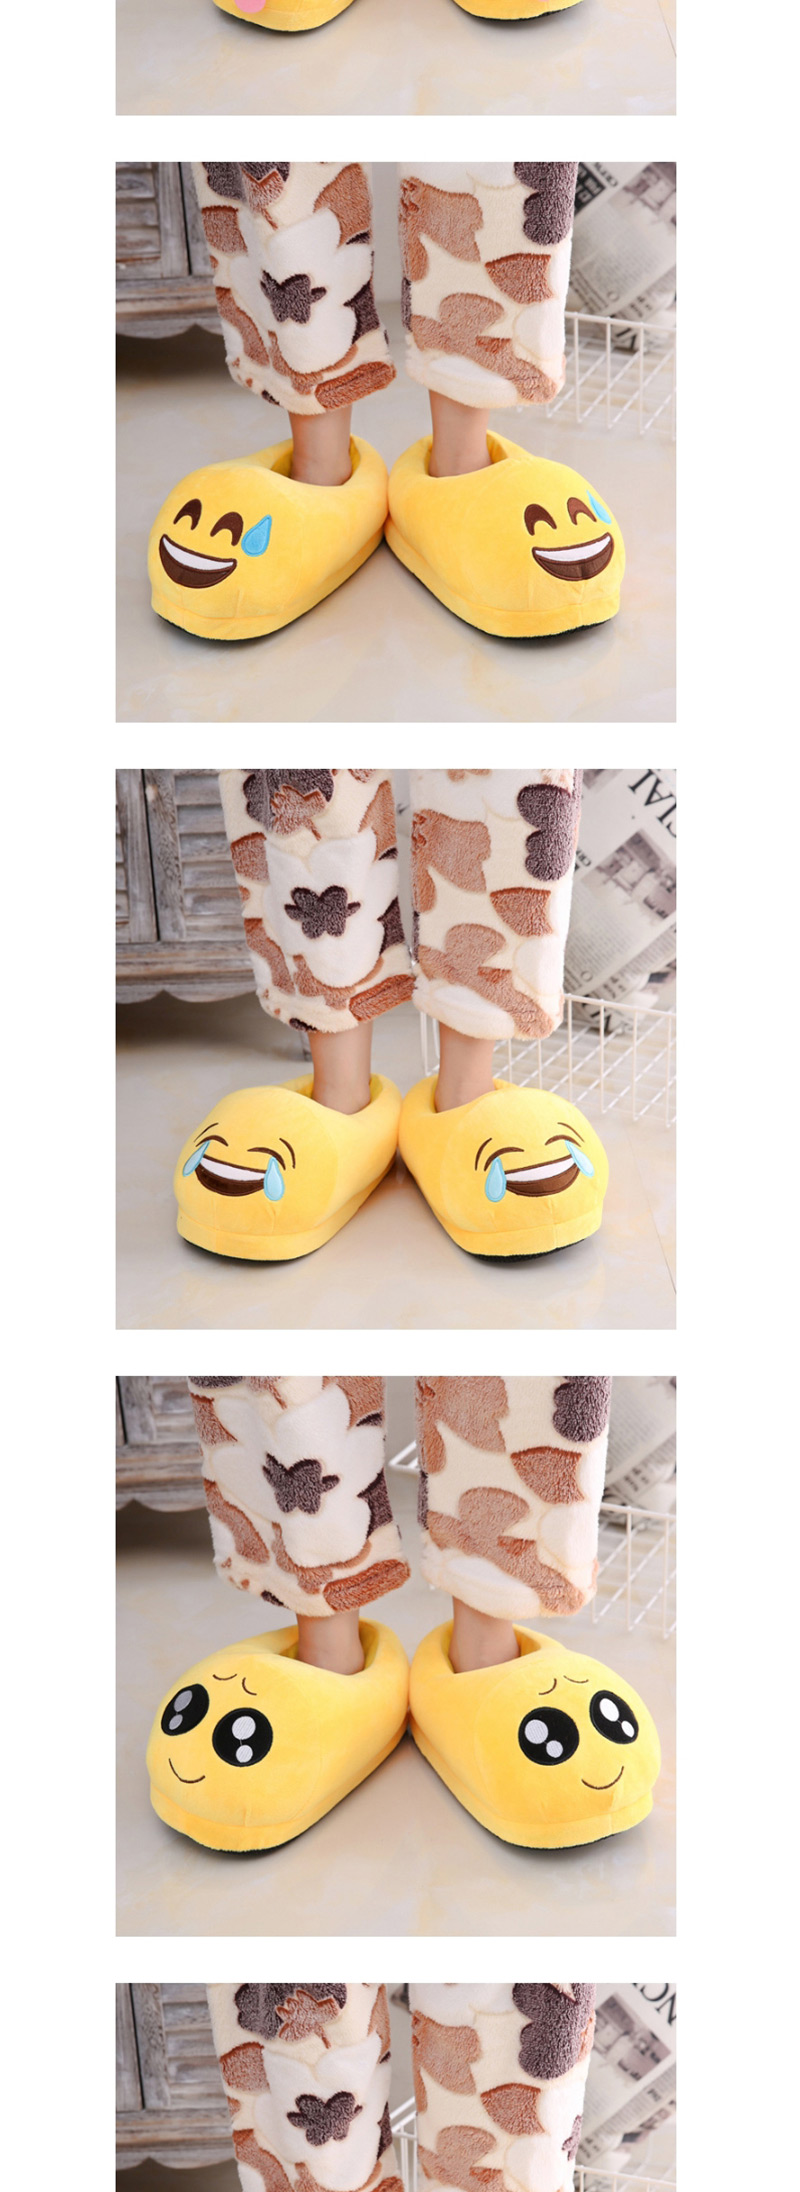 Fashion 3 Yellow Sunglasses Cartoon Expression Plush Bag With Cotton Slippers,Slippers